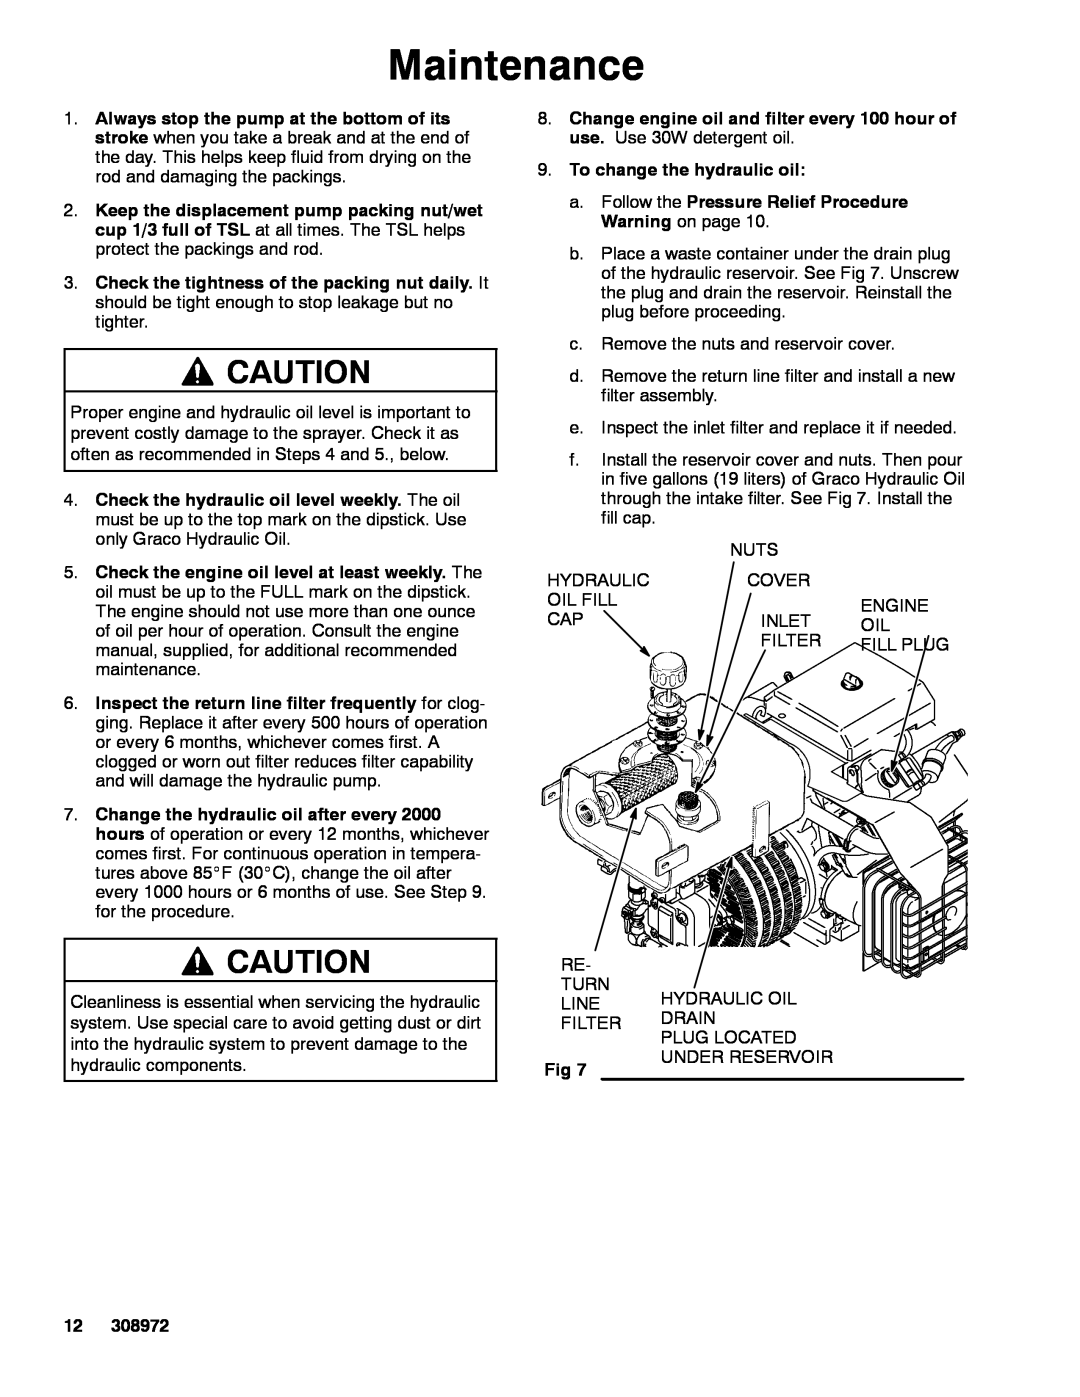 Graco Inc 687327, 687100 Maintenance, To change the hydraulic oil, a. Follow the Pressure Relief Procedure Warning on page 